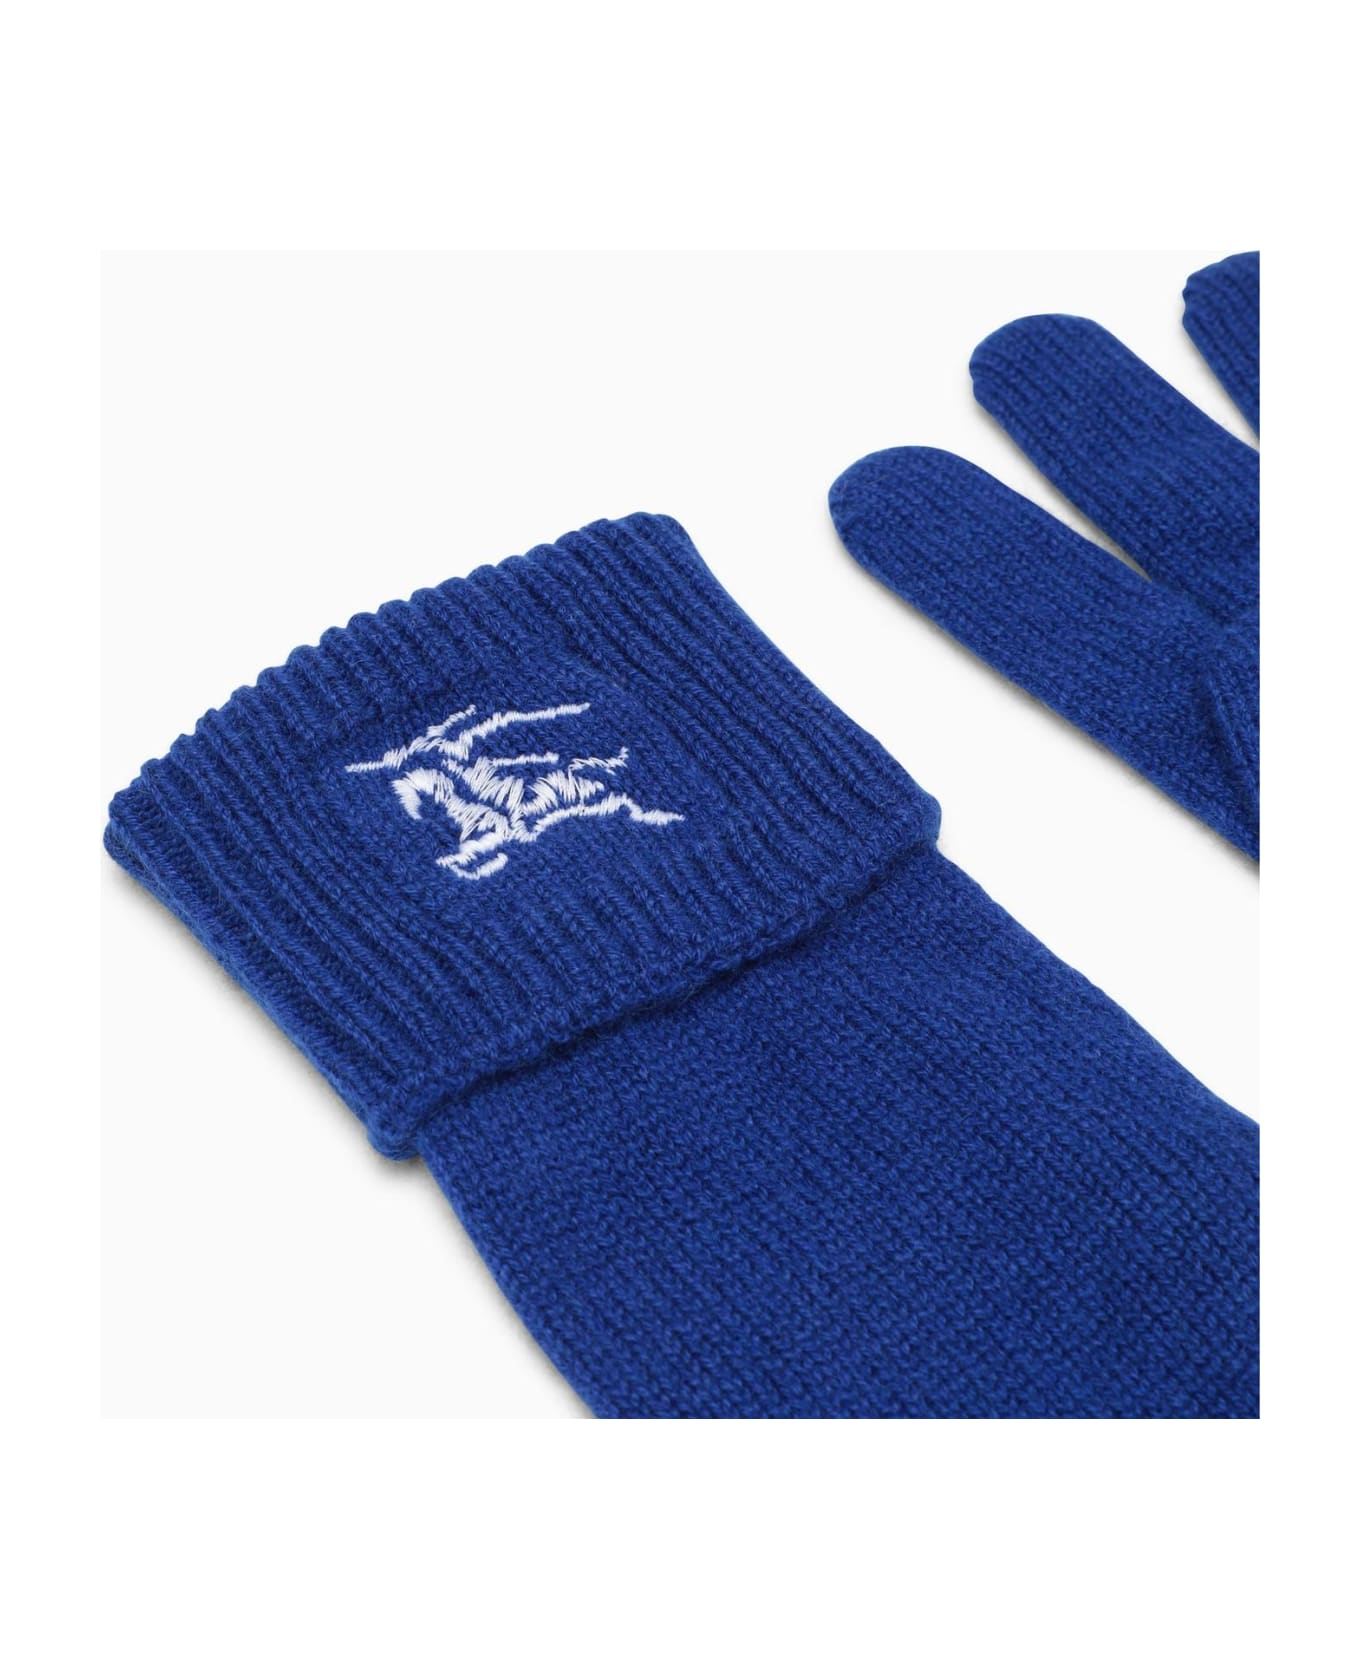 Burberry Blue Cashmere Gloves With Logo - Blue